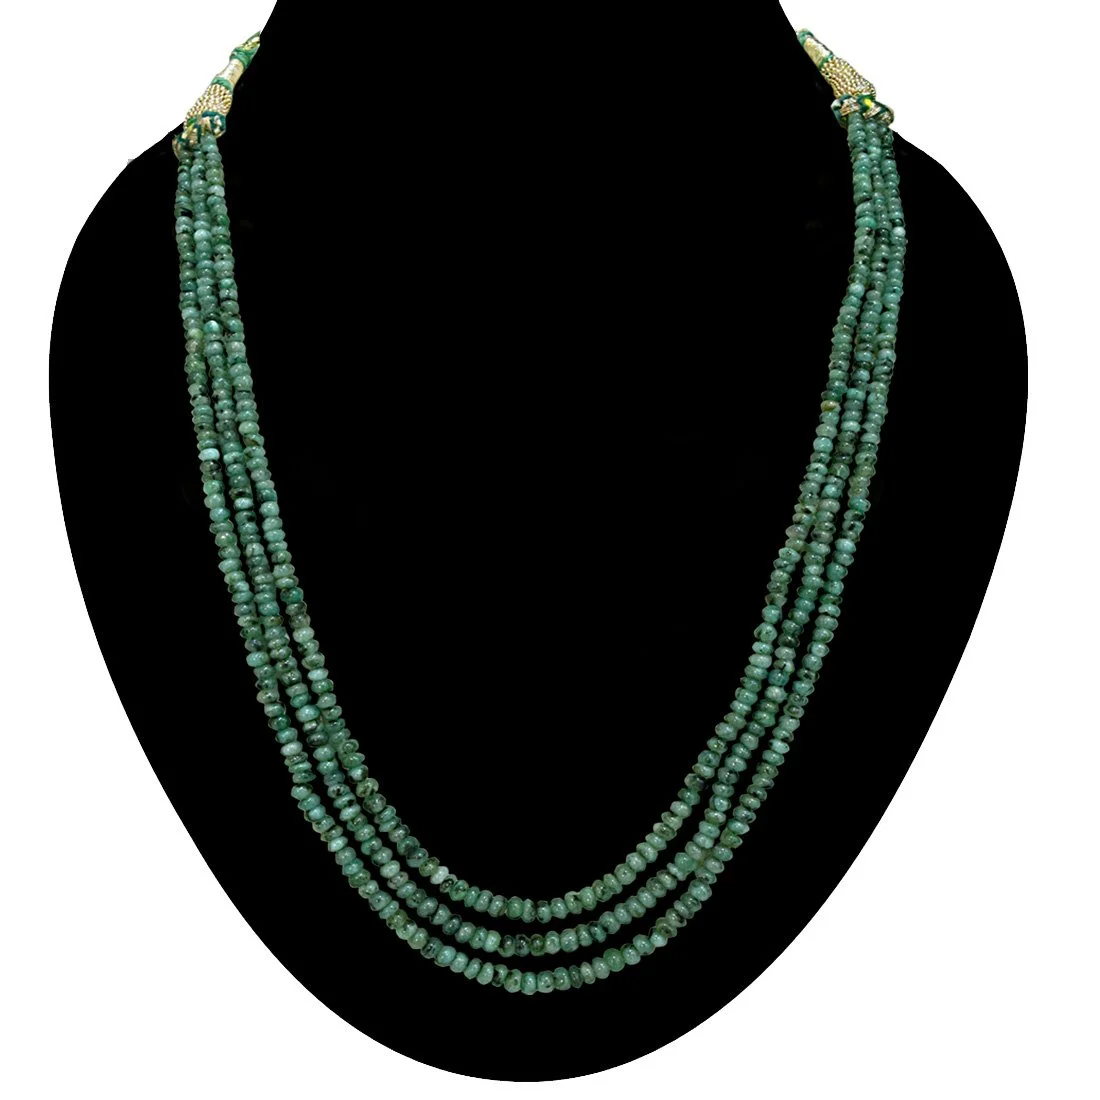 3 Line 151cts Real Natural Green Emerald Beads Necklace (151cts EMR Neck)